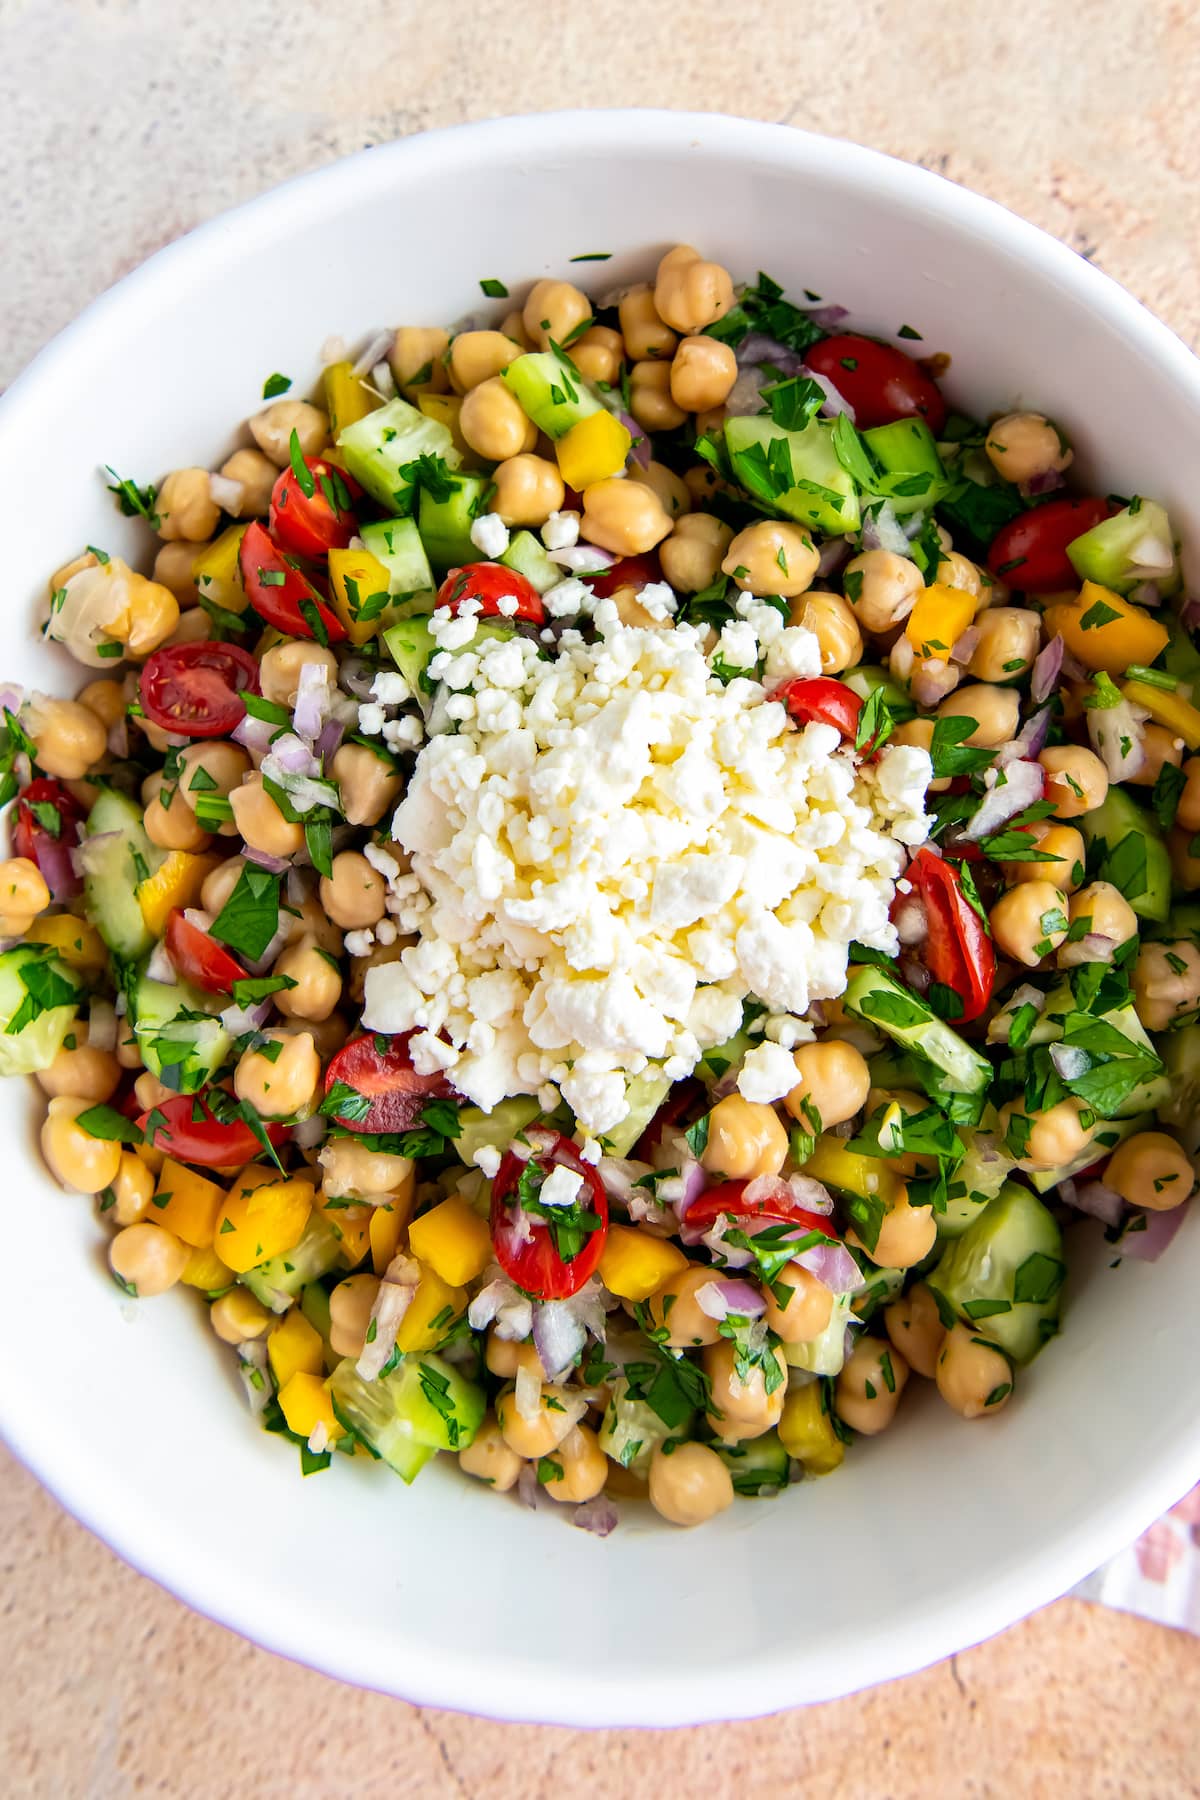 a pile of feta on top of a bowl of salad with chickpeas, cucumbers, tomatoes, and herbs